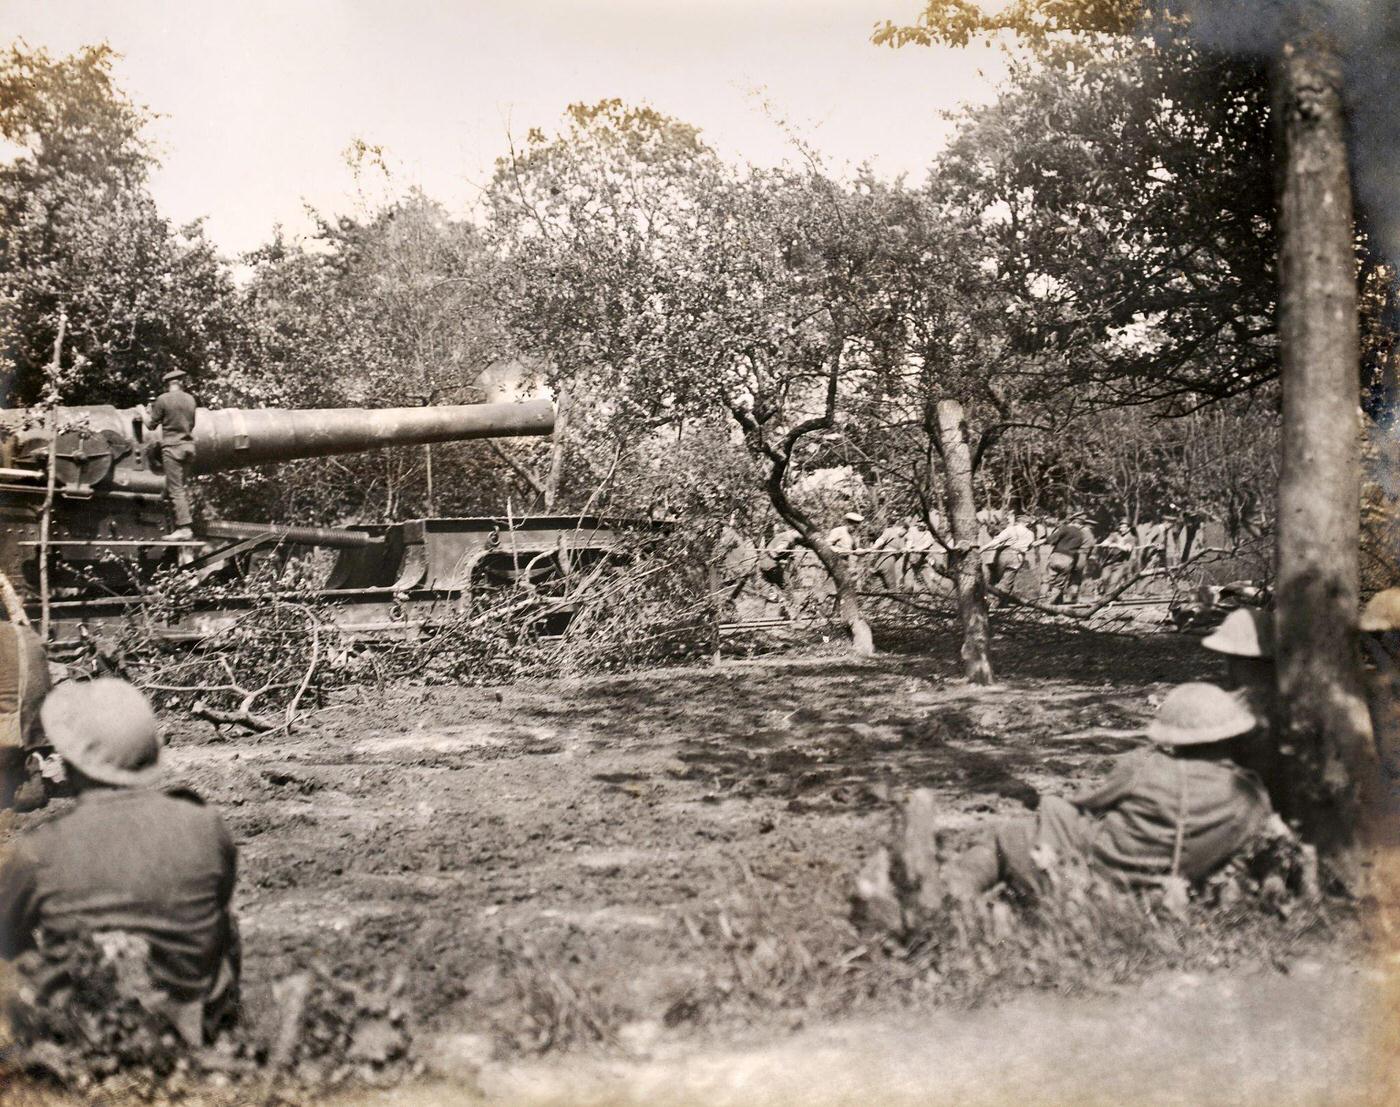 Railway gun being repositioned after firing on the British Western Front during World War I, 1916.